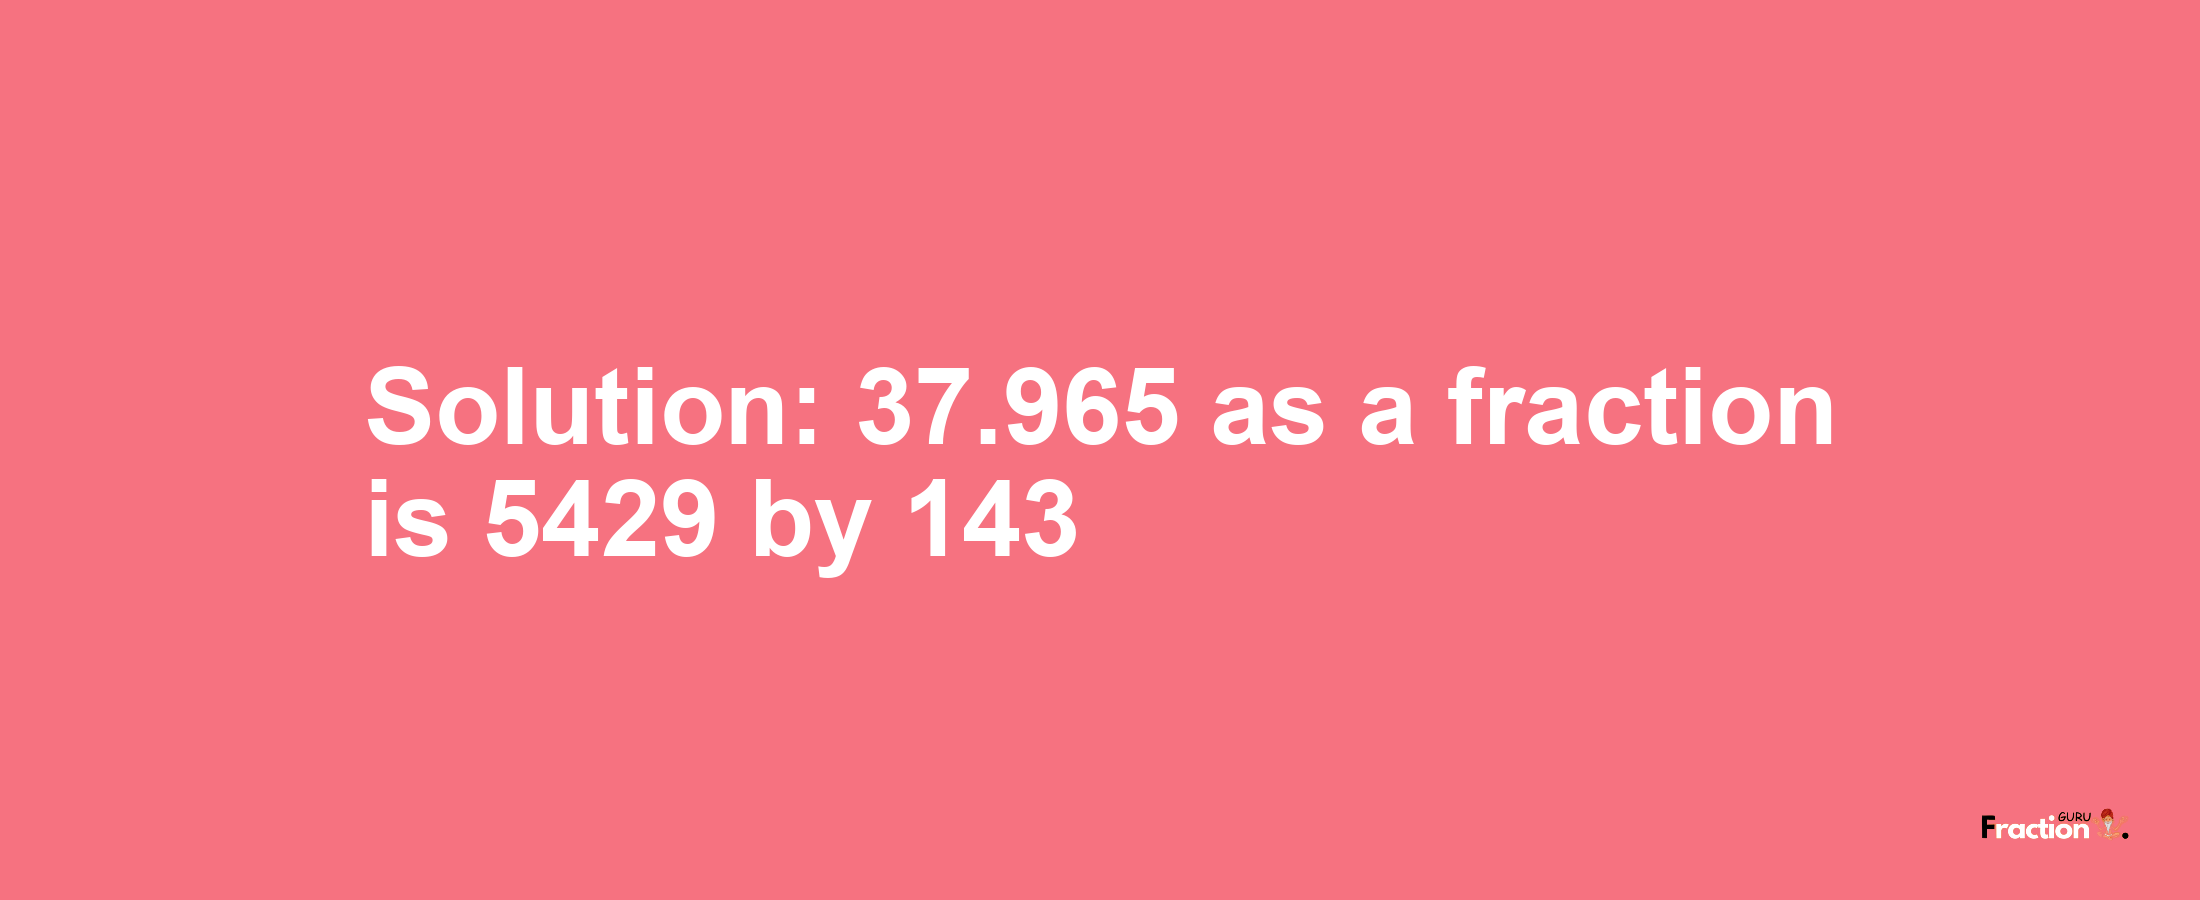 Solution:37.965 as a fraction is 5429/143